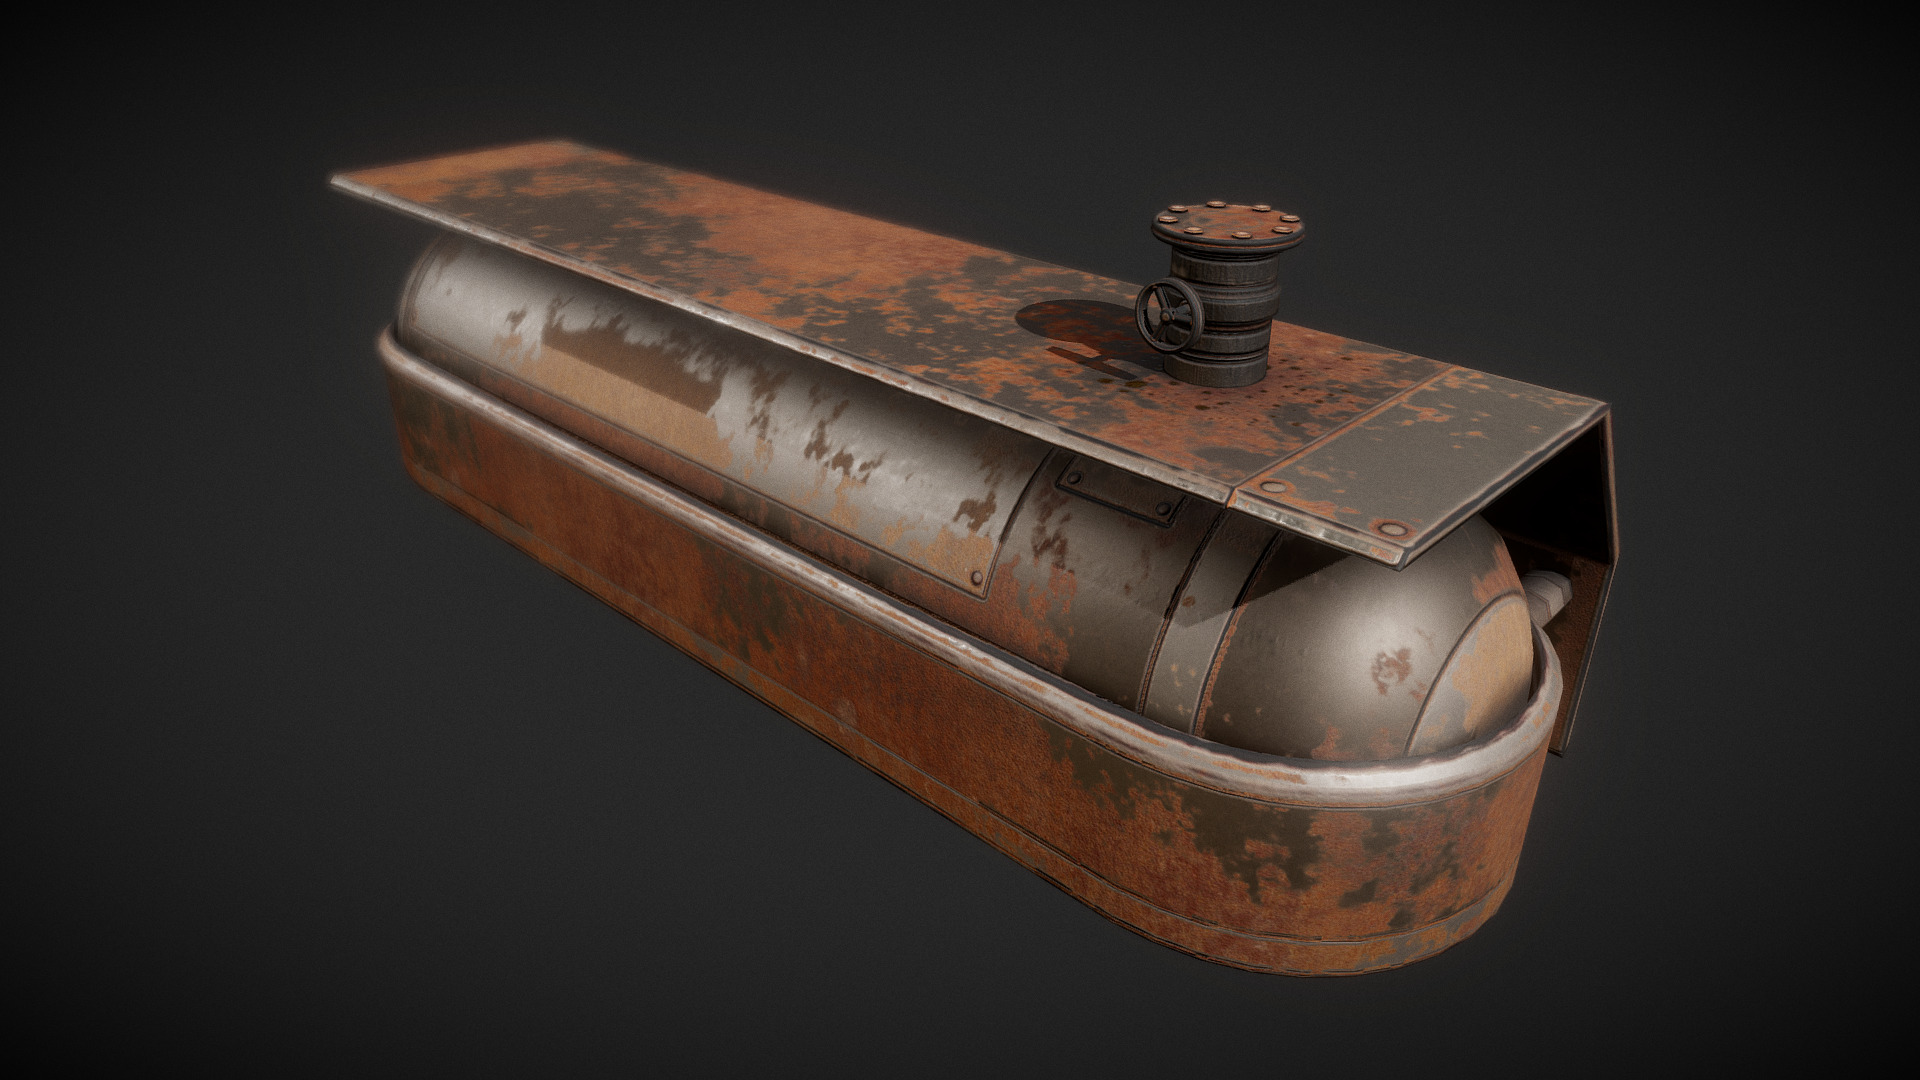 3D model Fuel Tank Rusty Version - This is a 3D model of the Fuel Tank Rusty Version. The 3D model is about a wooden gavel with a handle.